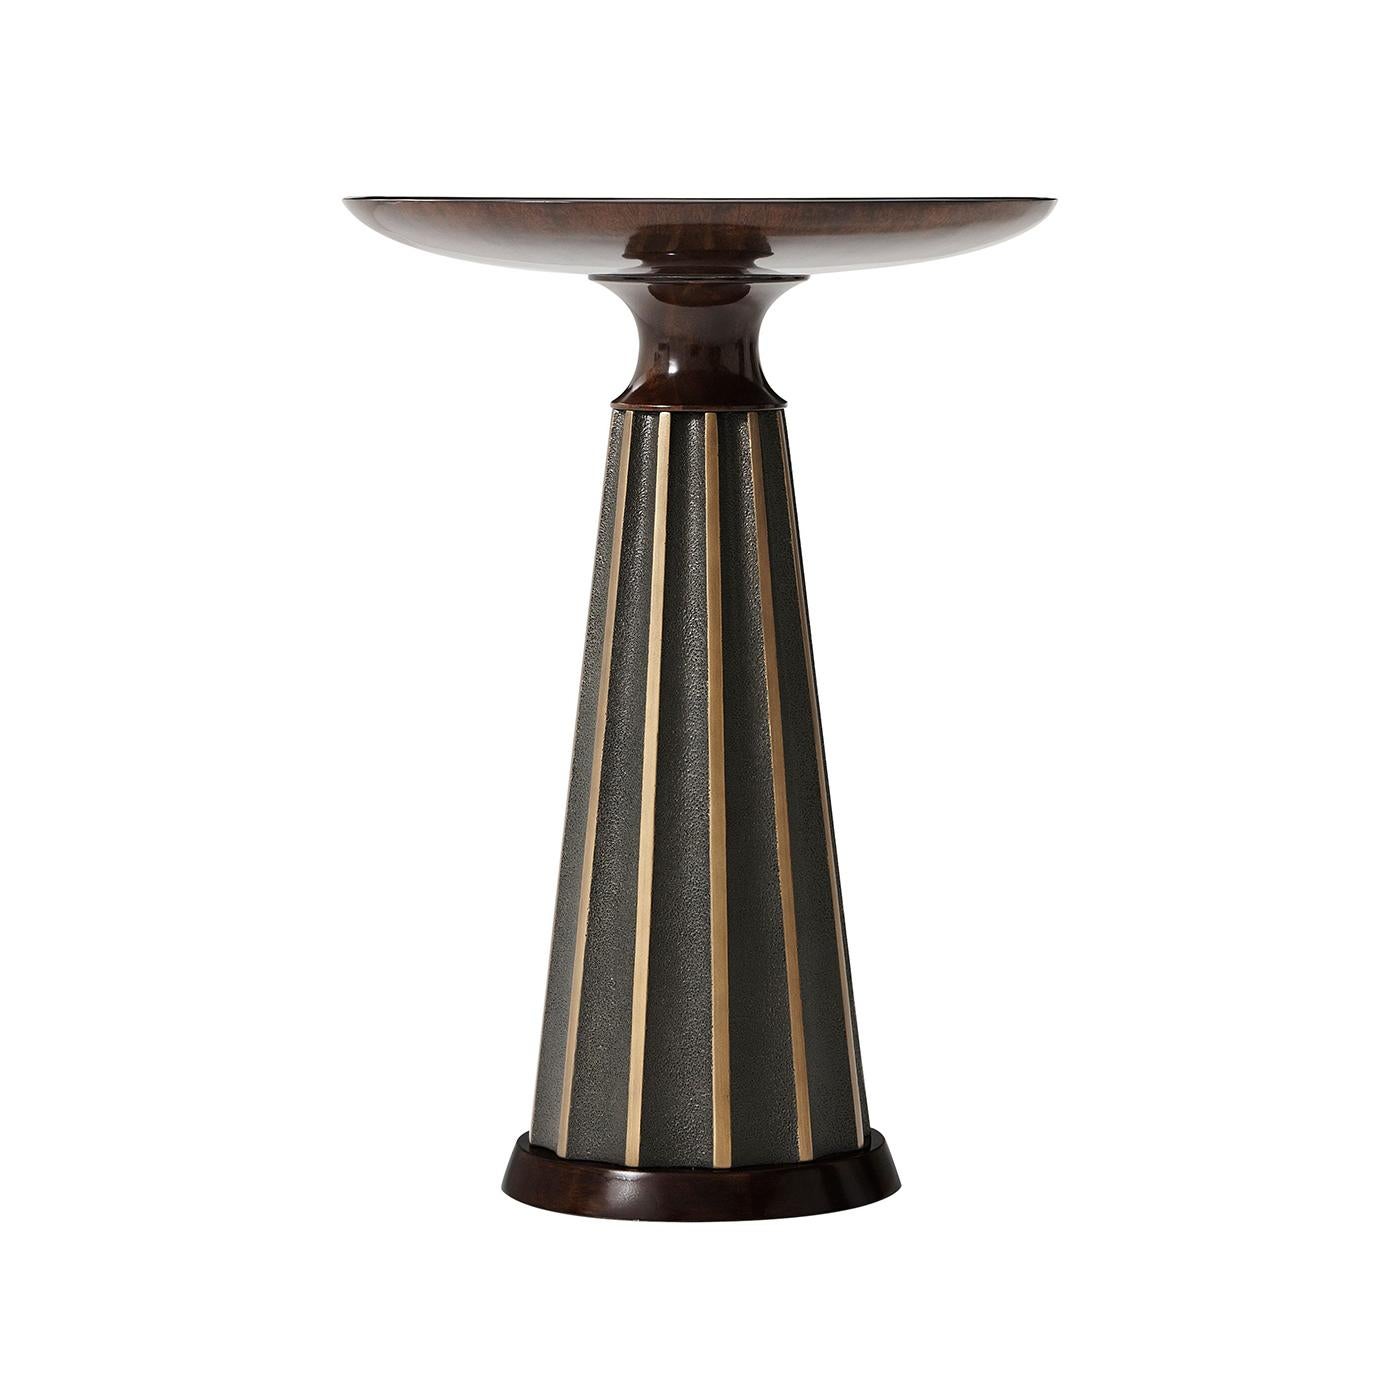 An Art Deco accent table with a polished walnut finish top and base with a figured walnut veneer above a composite tapered radial pedestal base with gilt highlights and textured ground.

Dimensions: 16